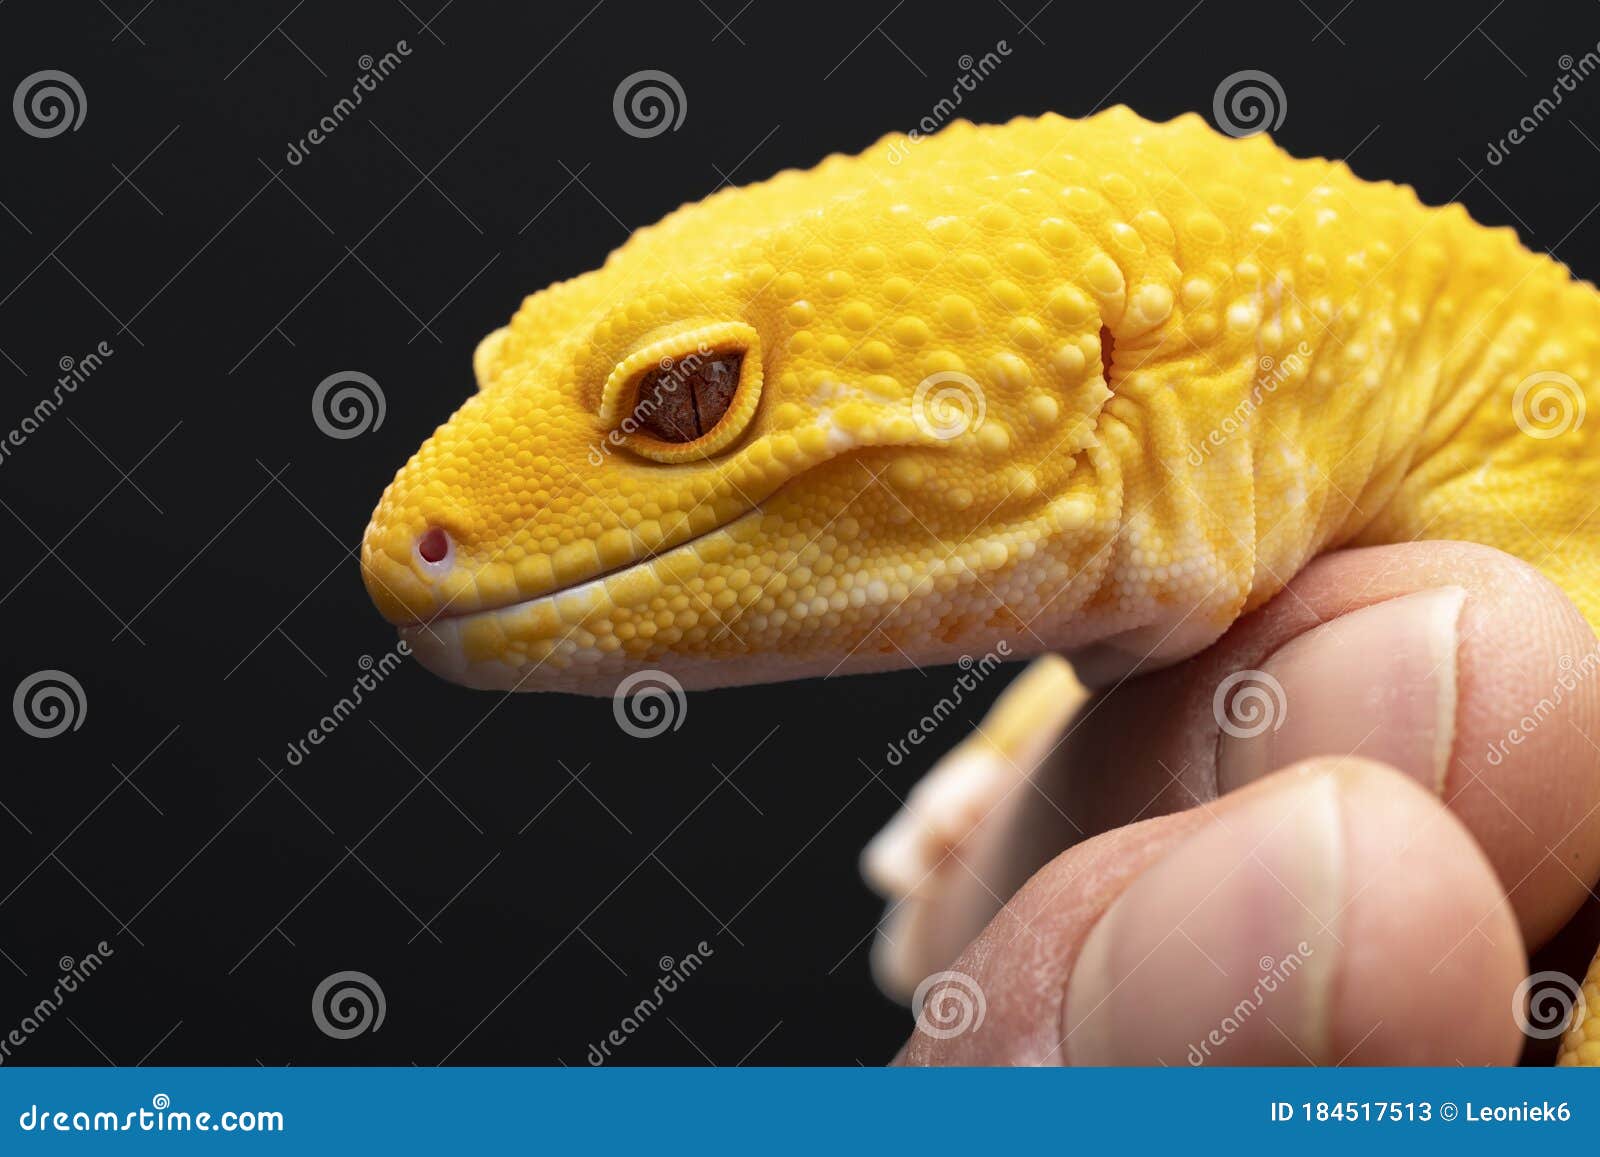 Yellow Leopard Gecko Lizard Red Eyes Held by Human Hand on a Black Background Stock Image - of animal, dragon: